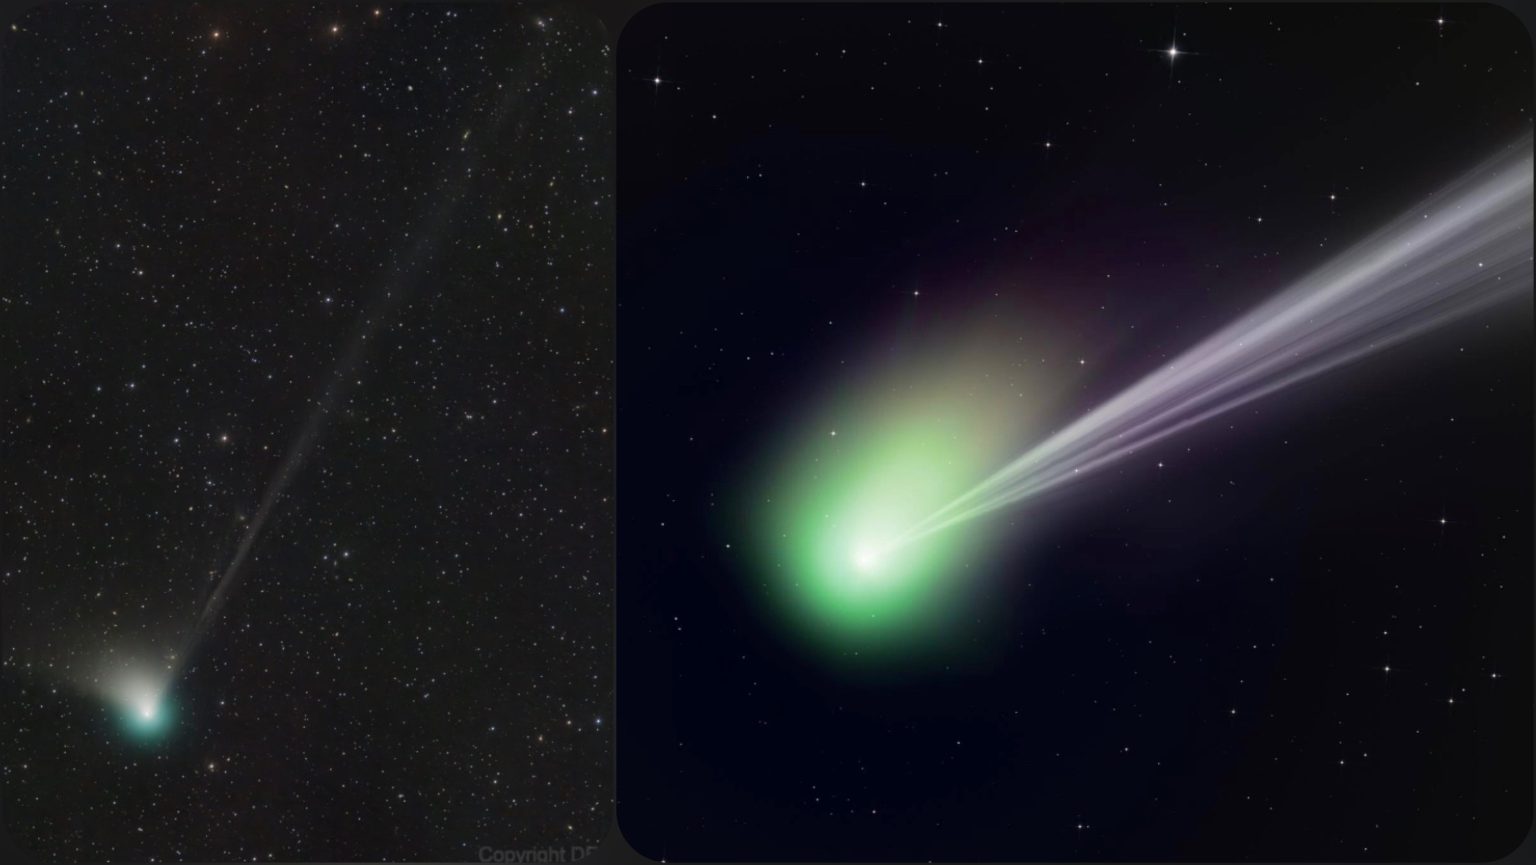 Live TV Green comet, visible in the night sky for first time since